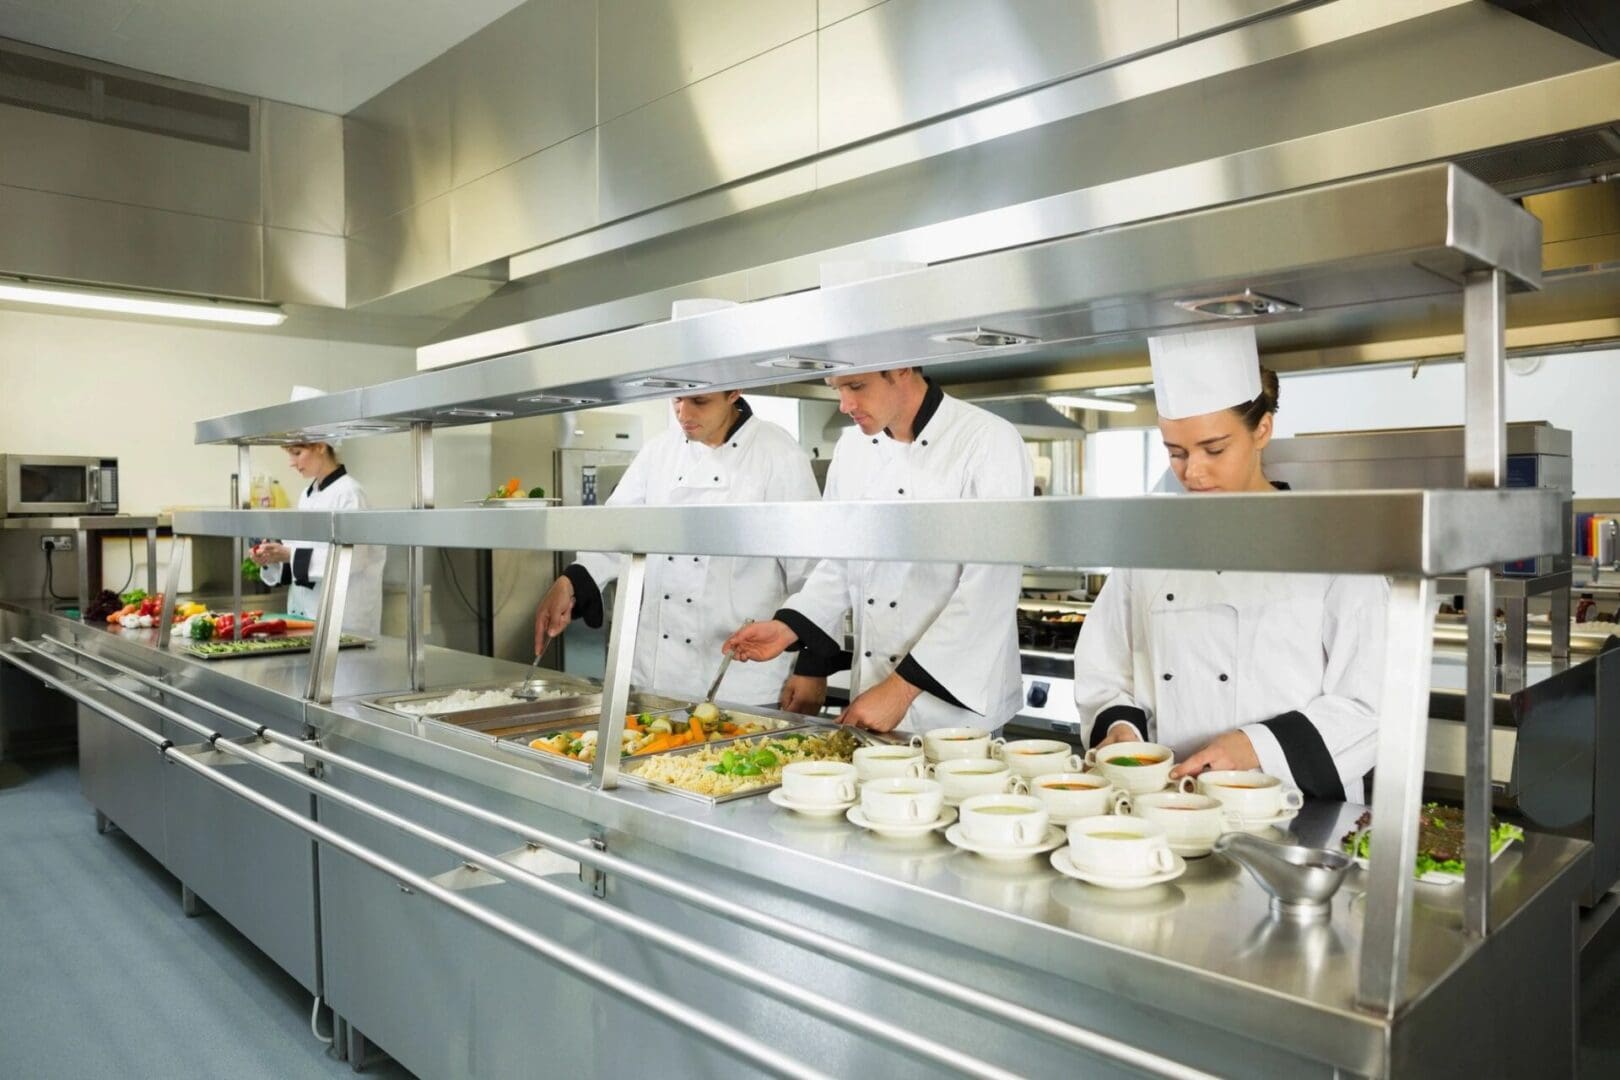 A group of chefs preparing food in a kitchen.